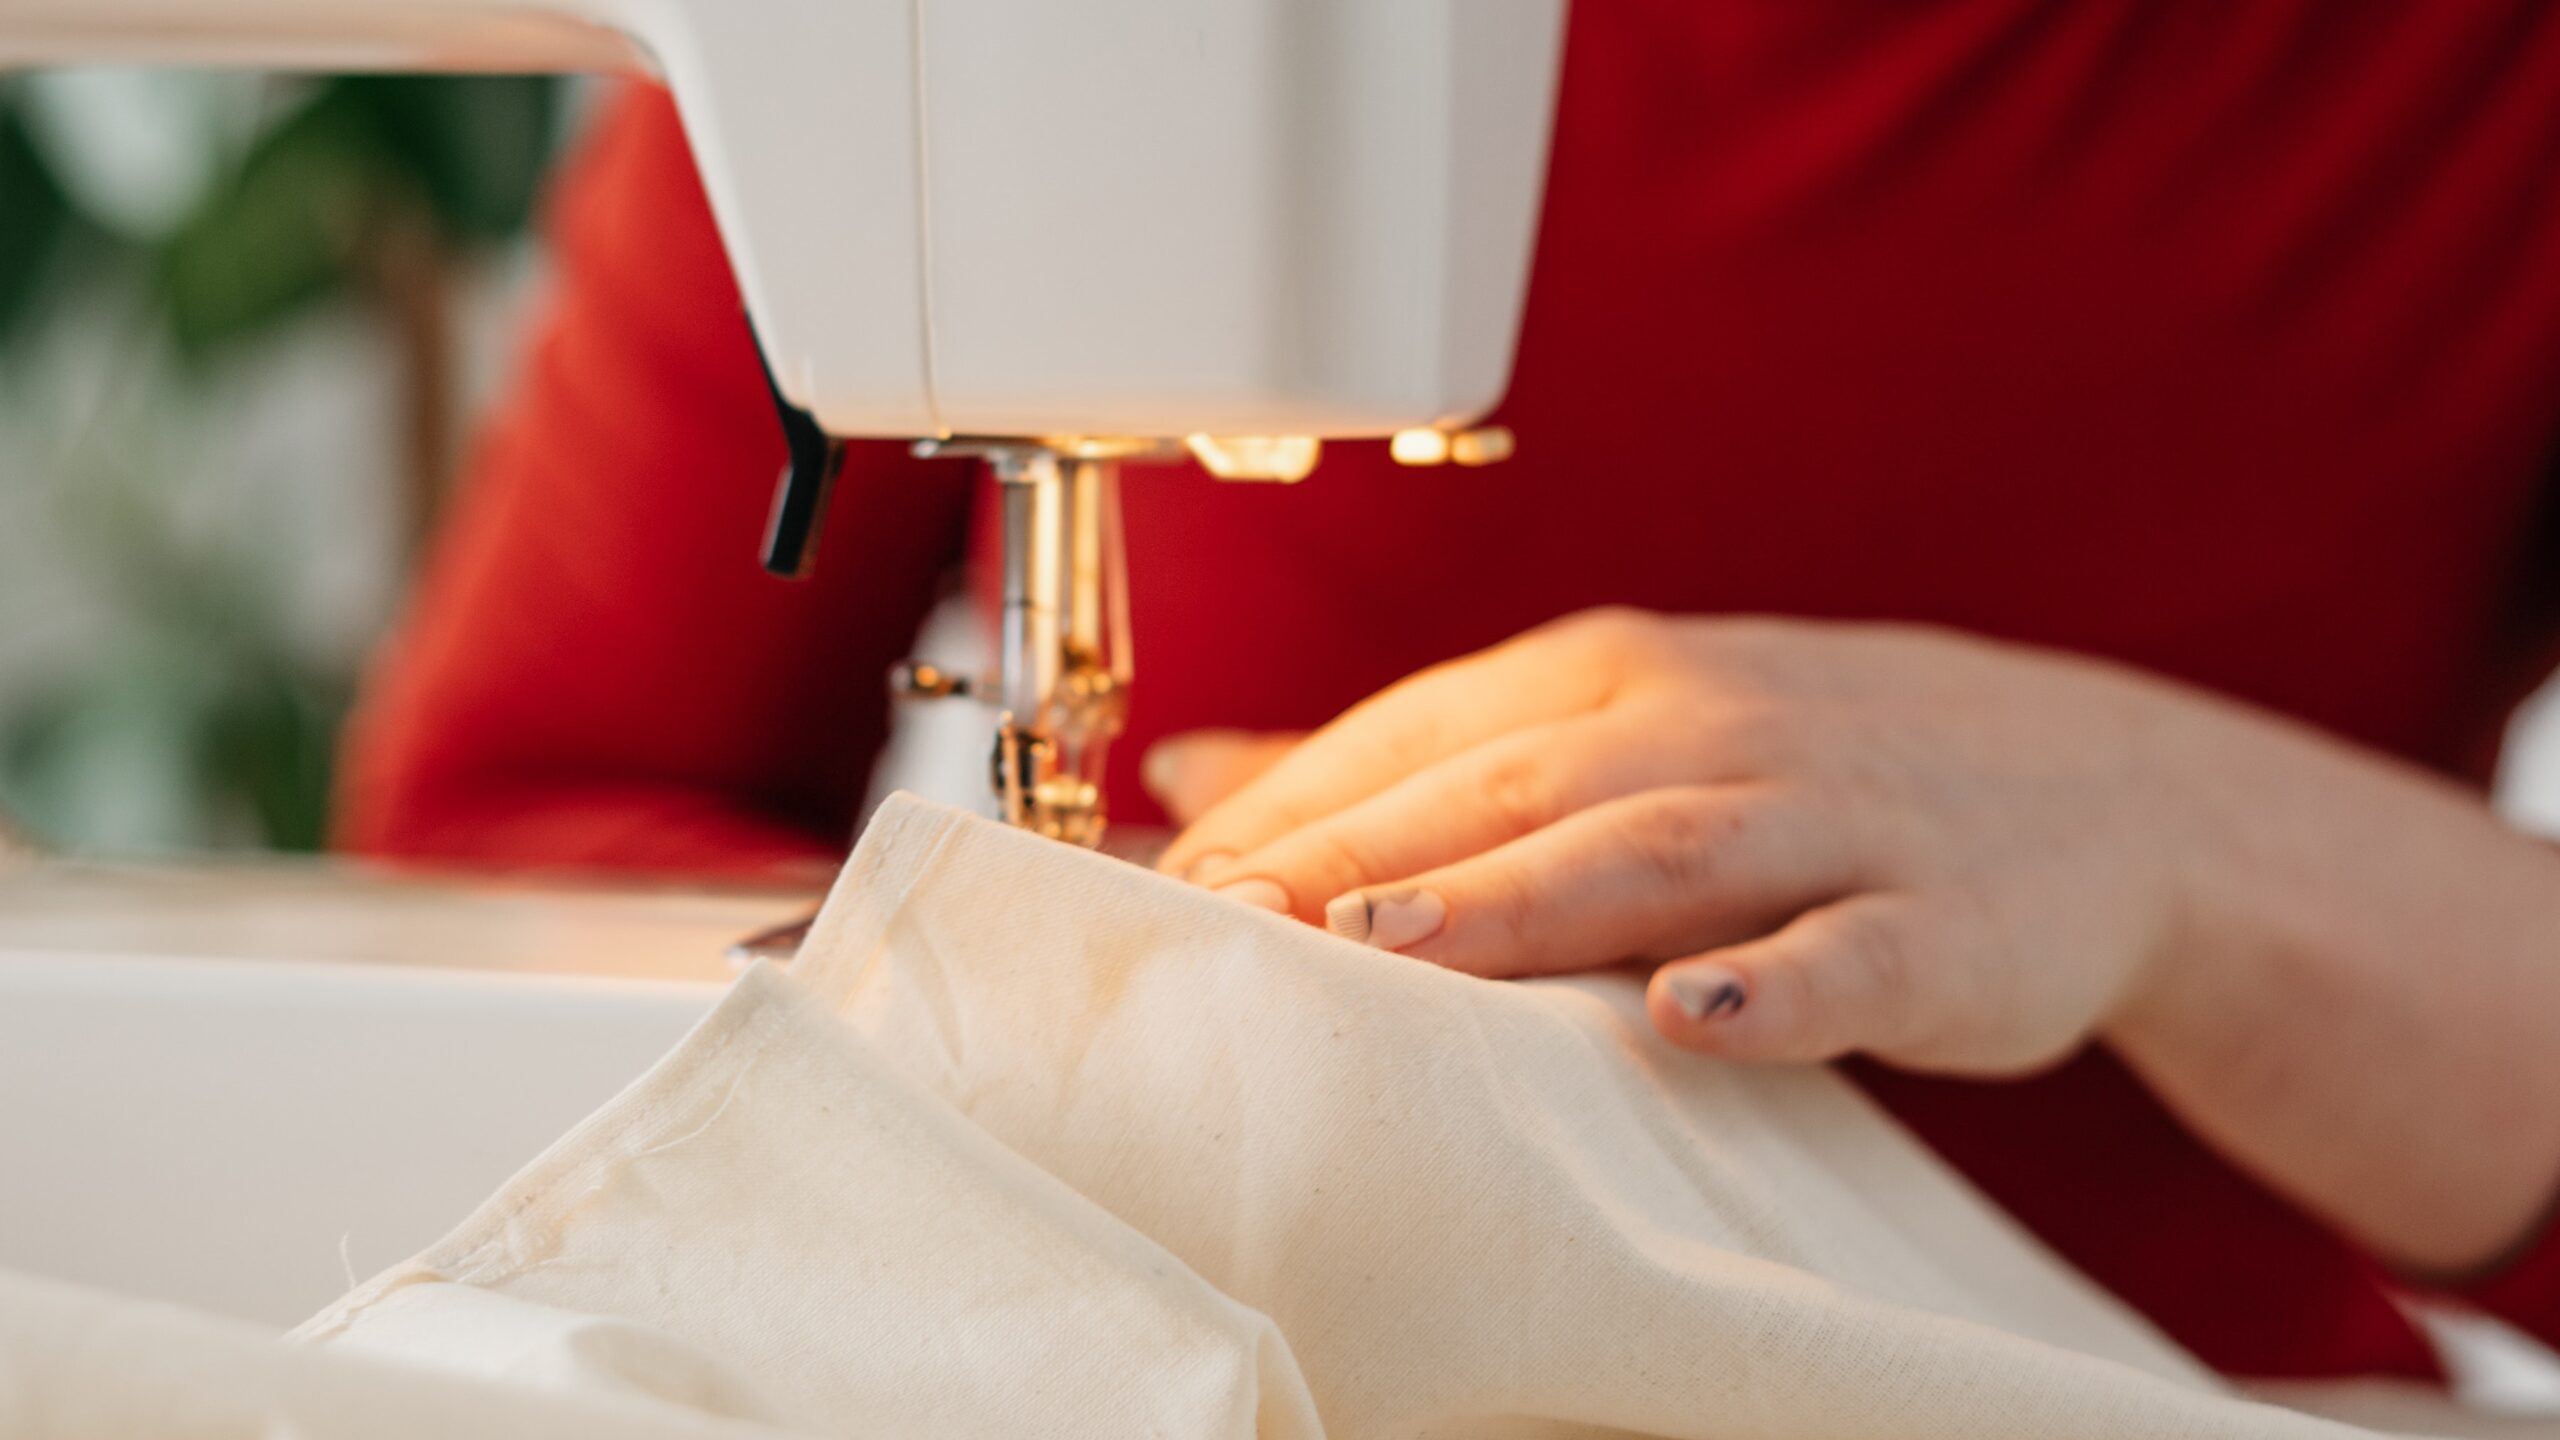 the-hand-of-a-person-in-a-red-ress-stitching-a-fabric-using-a-sewing-machine